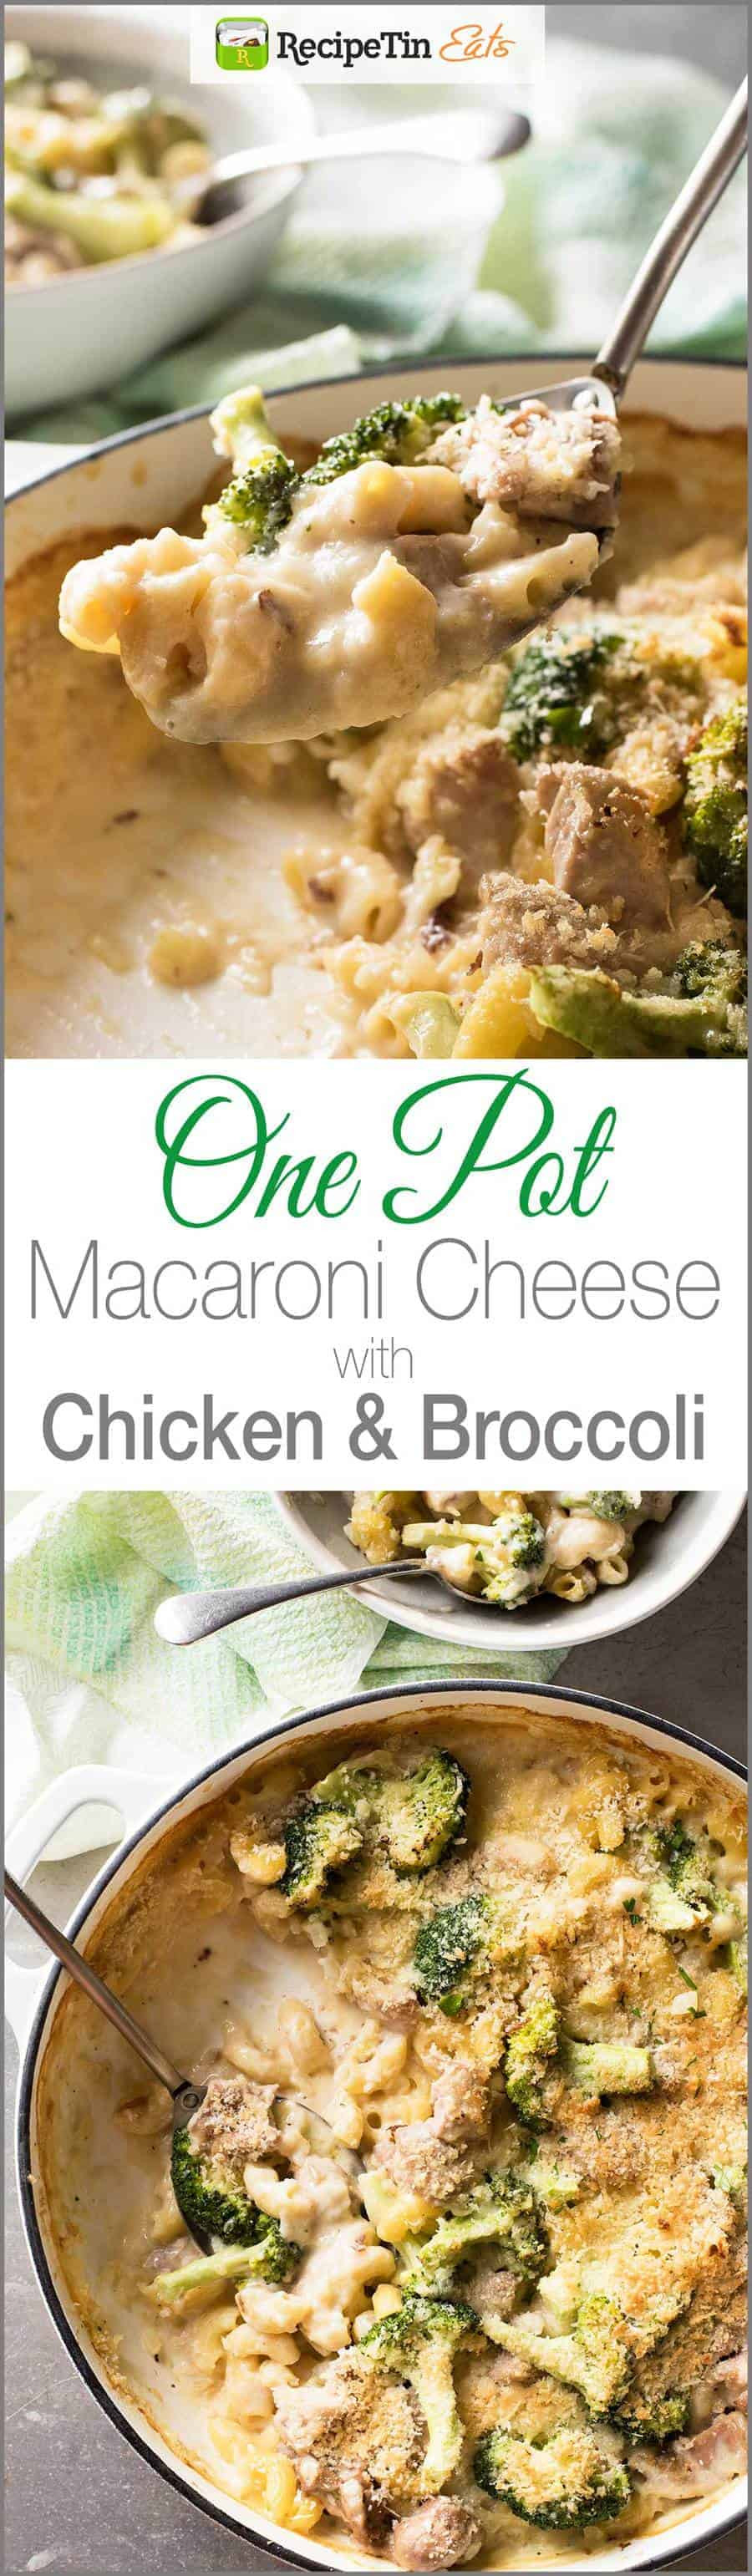 Baked Chicken Mac And Cheese
 Baked Macaroni Cheese with Chicken & BROCCOLI e Pot